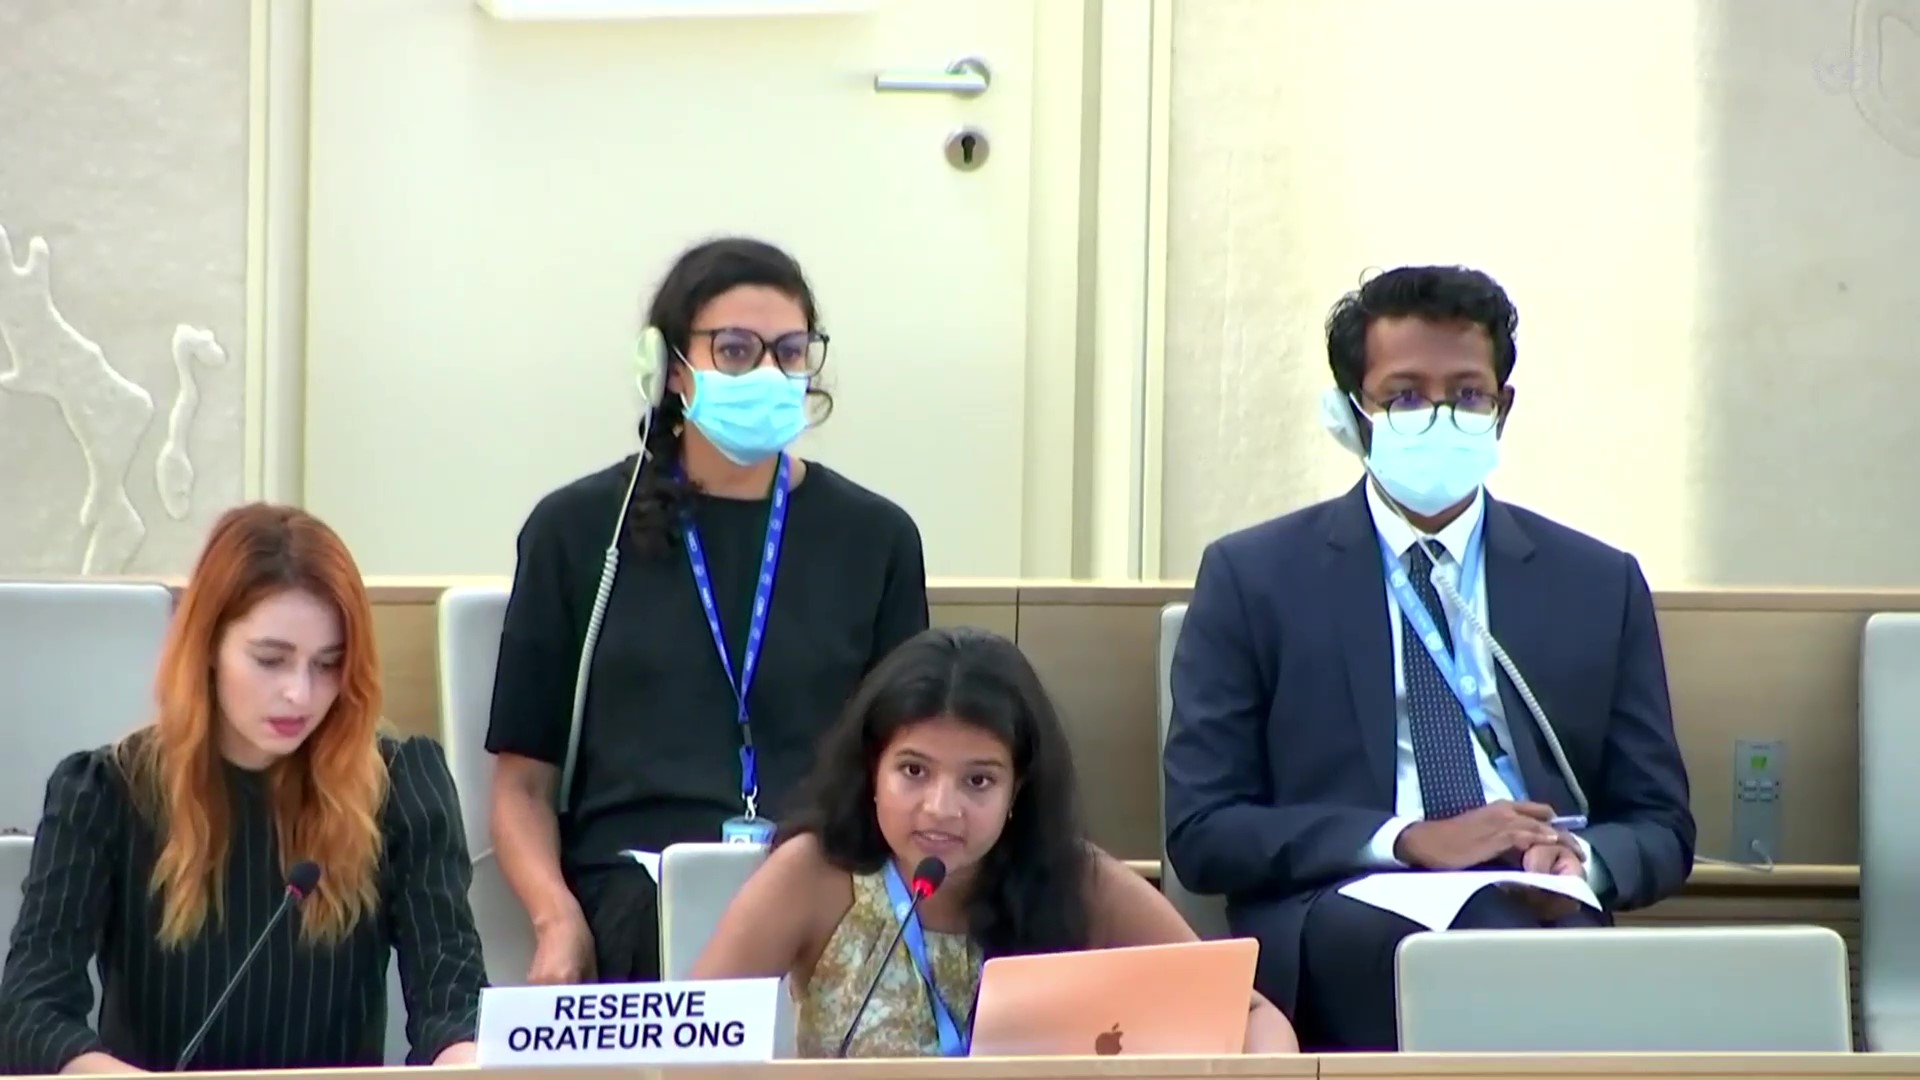 HRC51: GICJ urged stated to not use the pandemic as a means to limit democracy